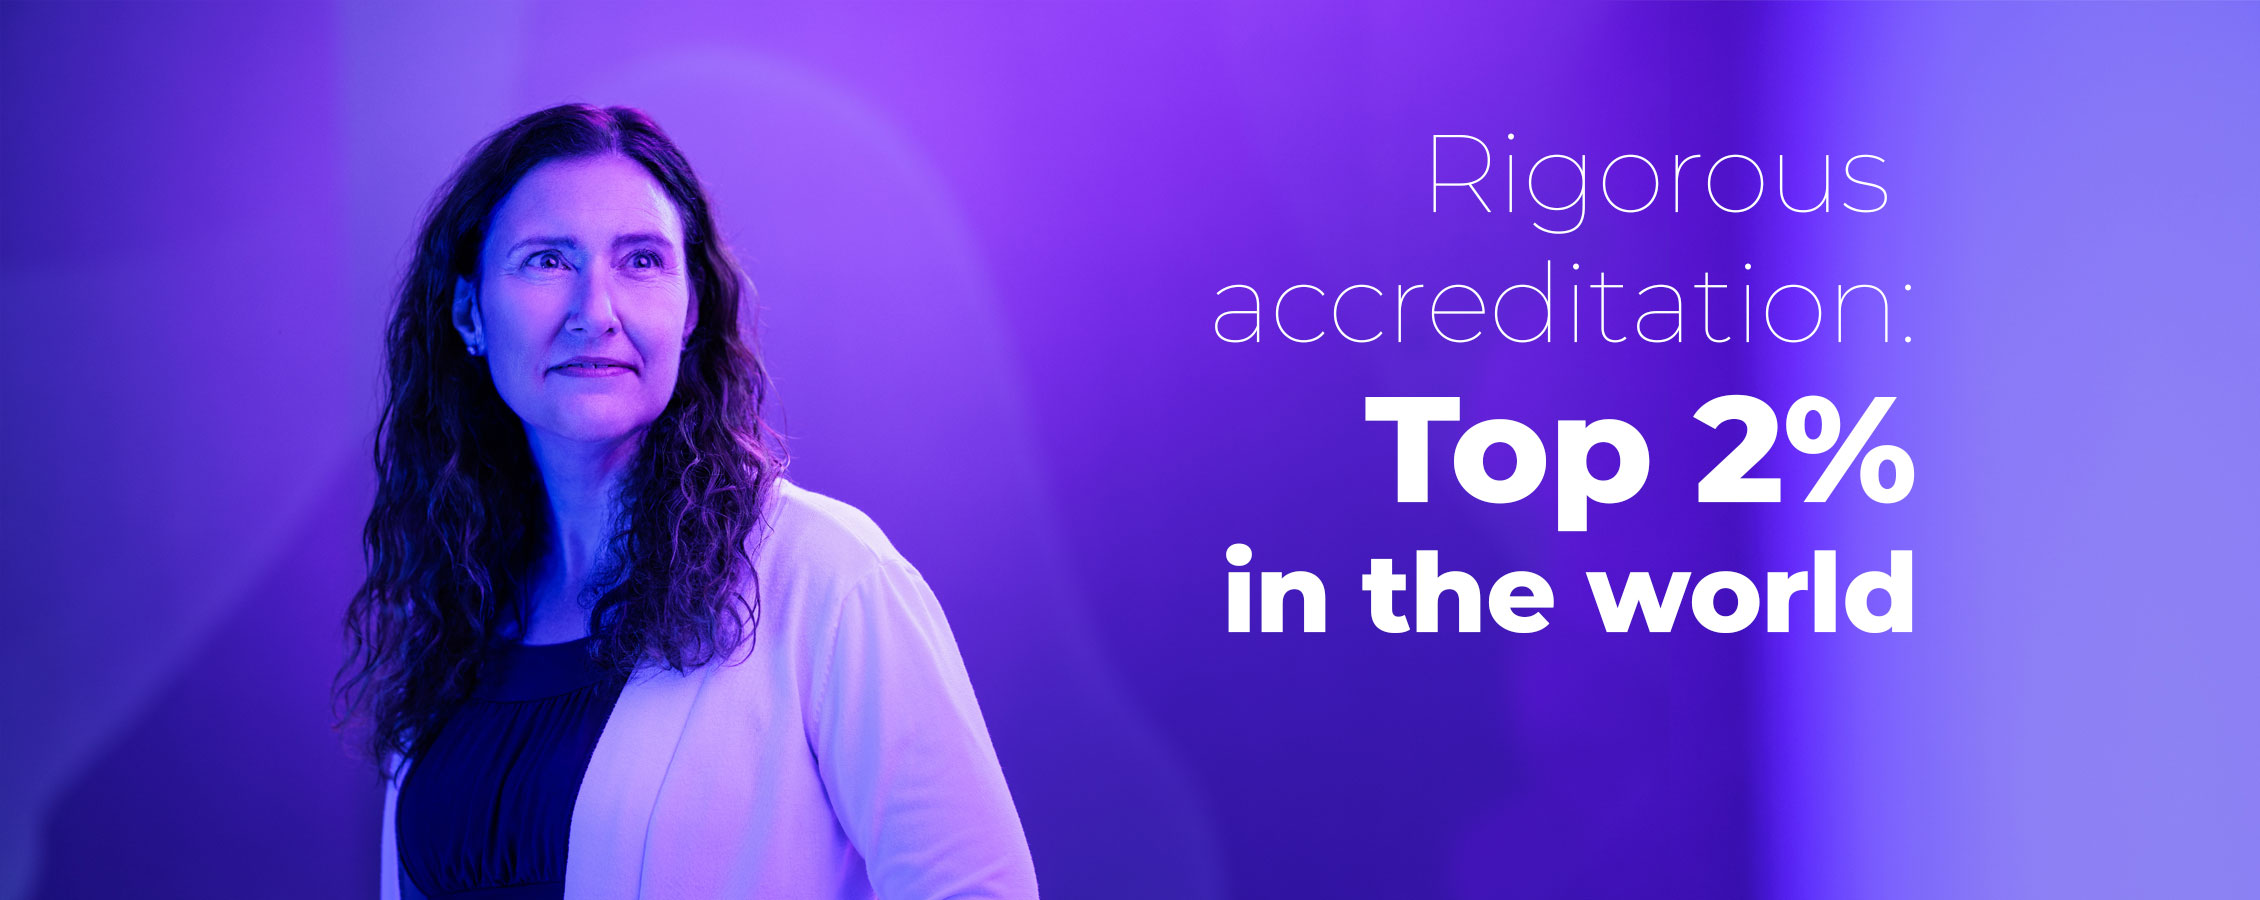 Rigorous accreditation: Top 2% in the world